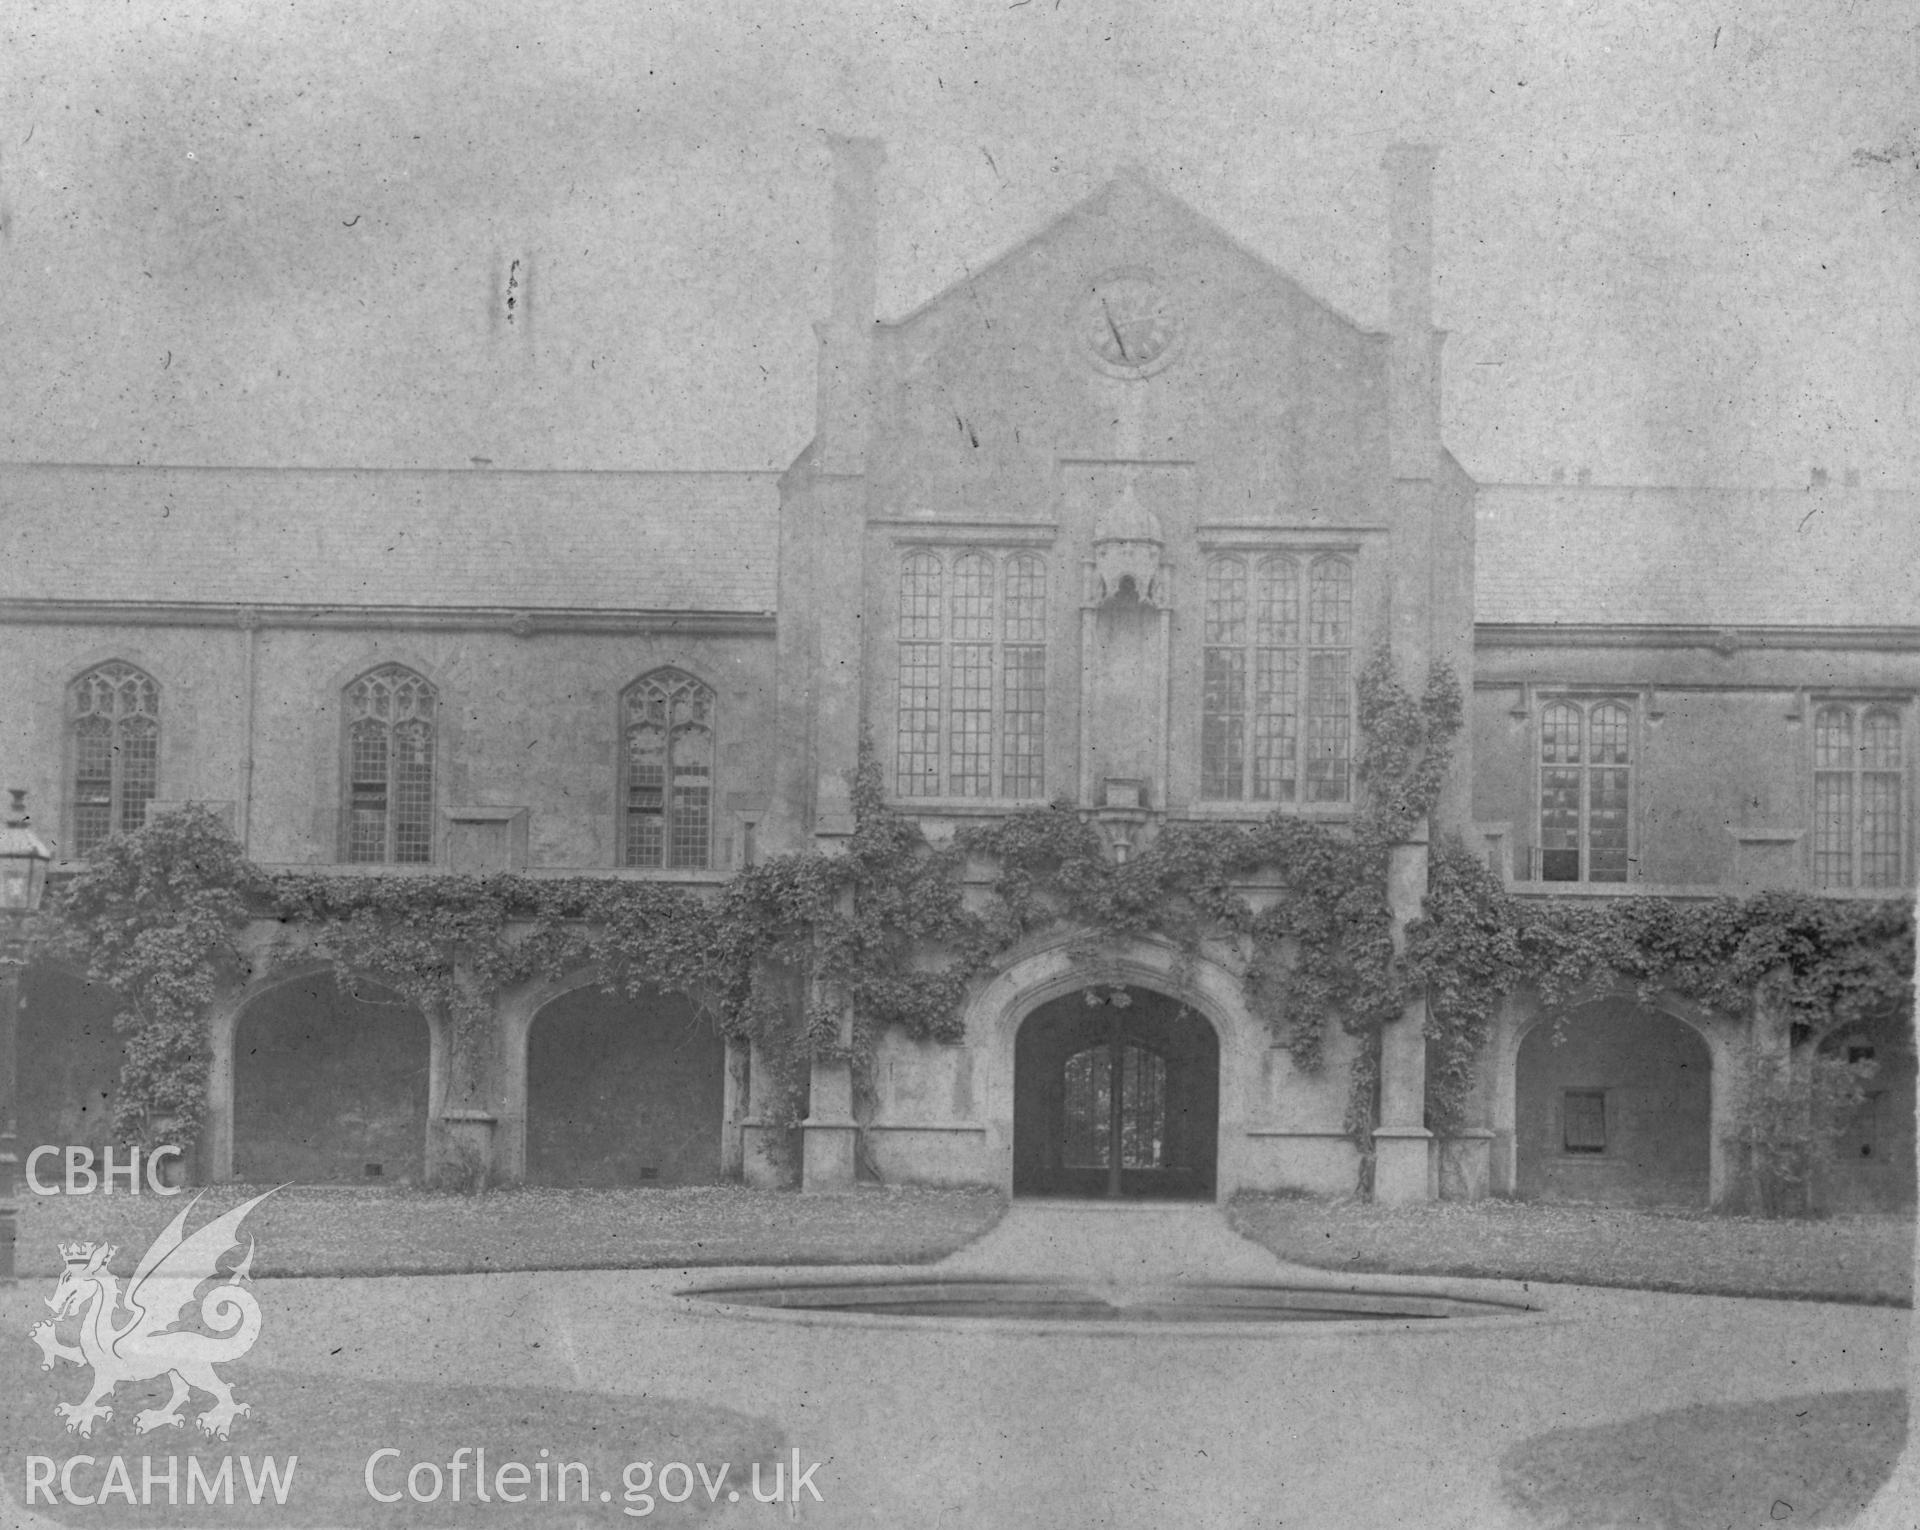 'Lampeter College 1913' . Digitised from a photograph album showing views of Aberystwyth and District, produced by David John Saer, school teacher of Aberystwyth. Loaned for copying by Dr Alan Chamberlain.